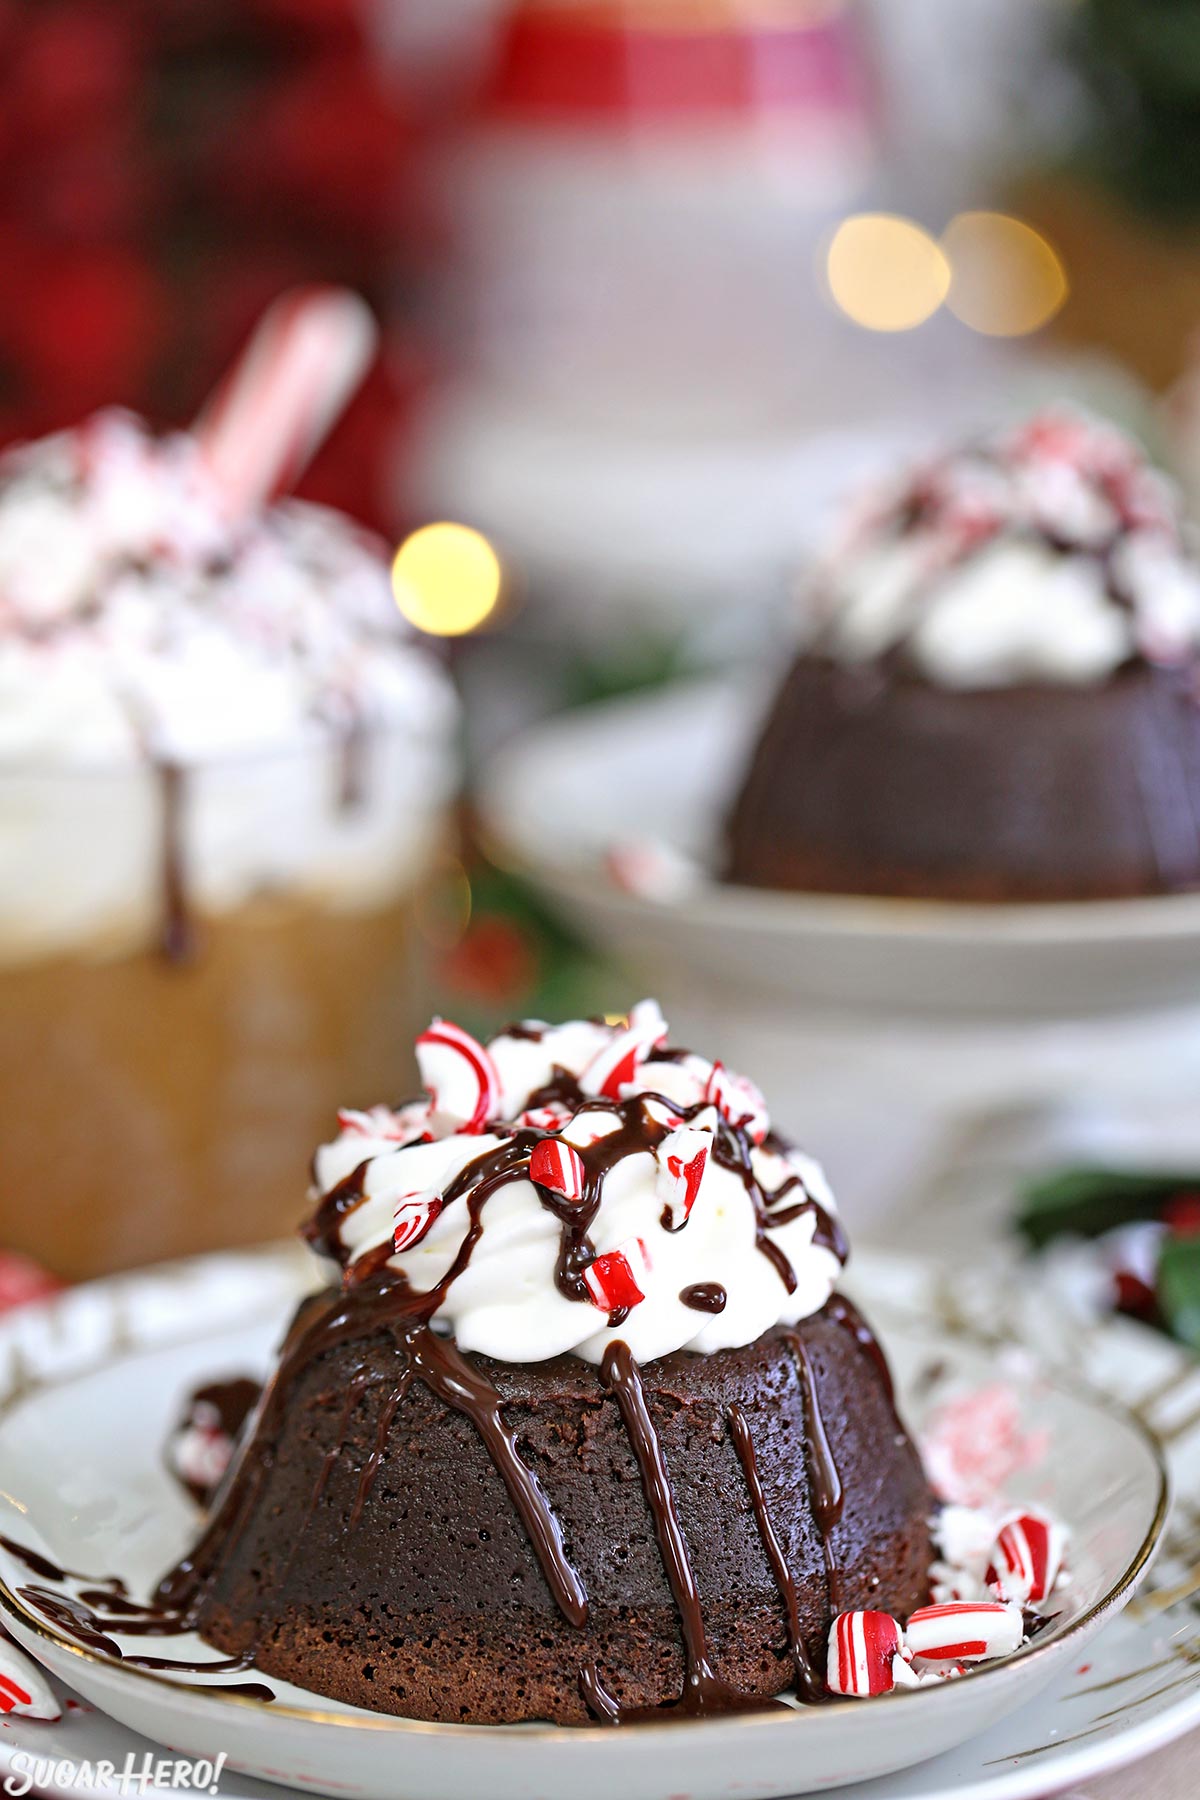 Peppermint Mocha Lava Cakes - two chocolate cakes topped with whipped cream, chocolate sauce, and candy canes, with coffee in the background | From SugarHero.com